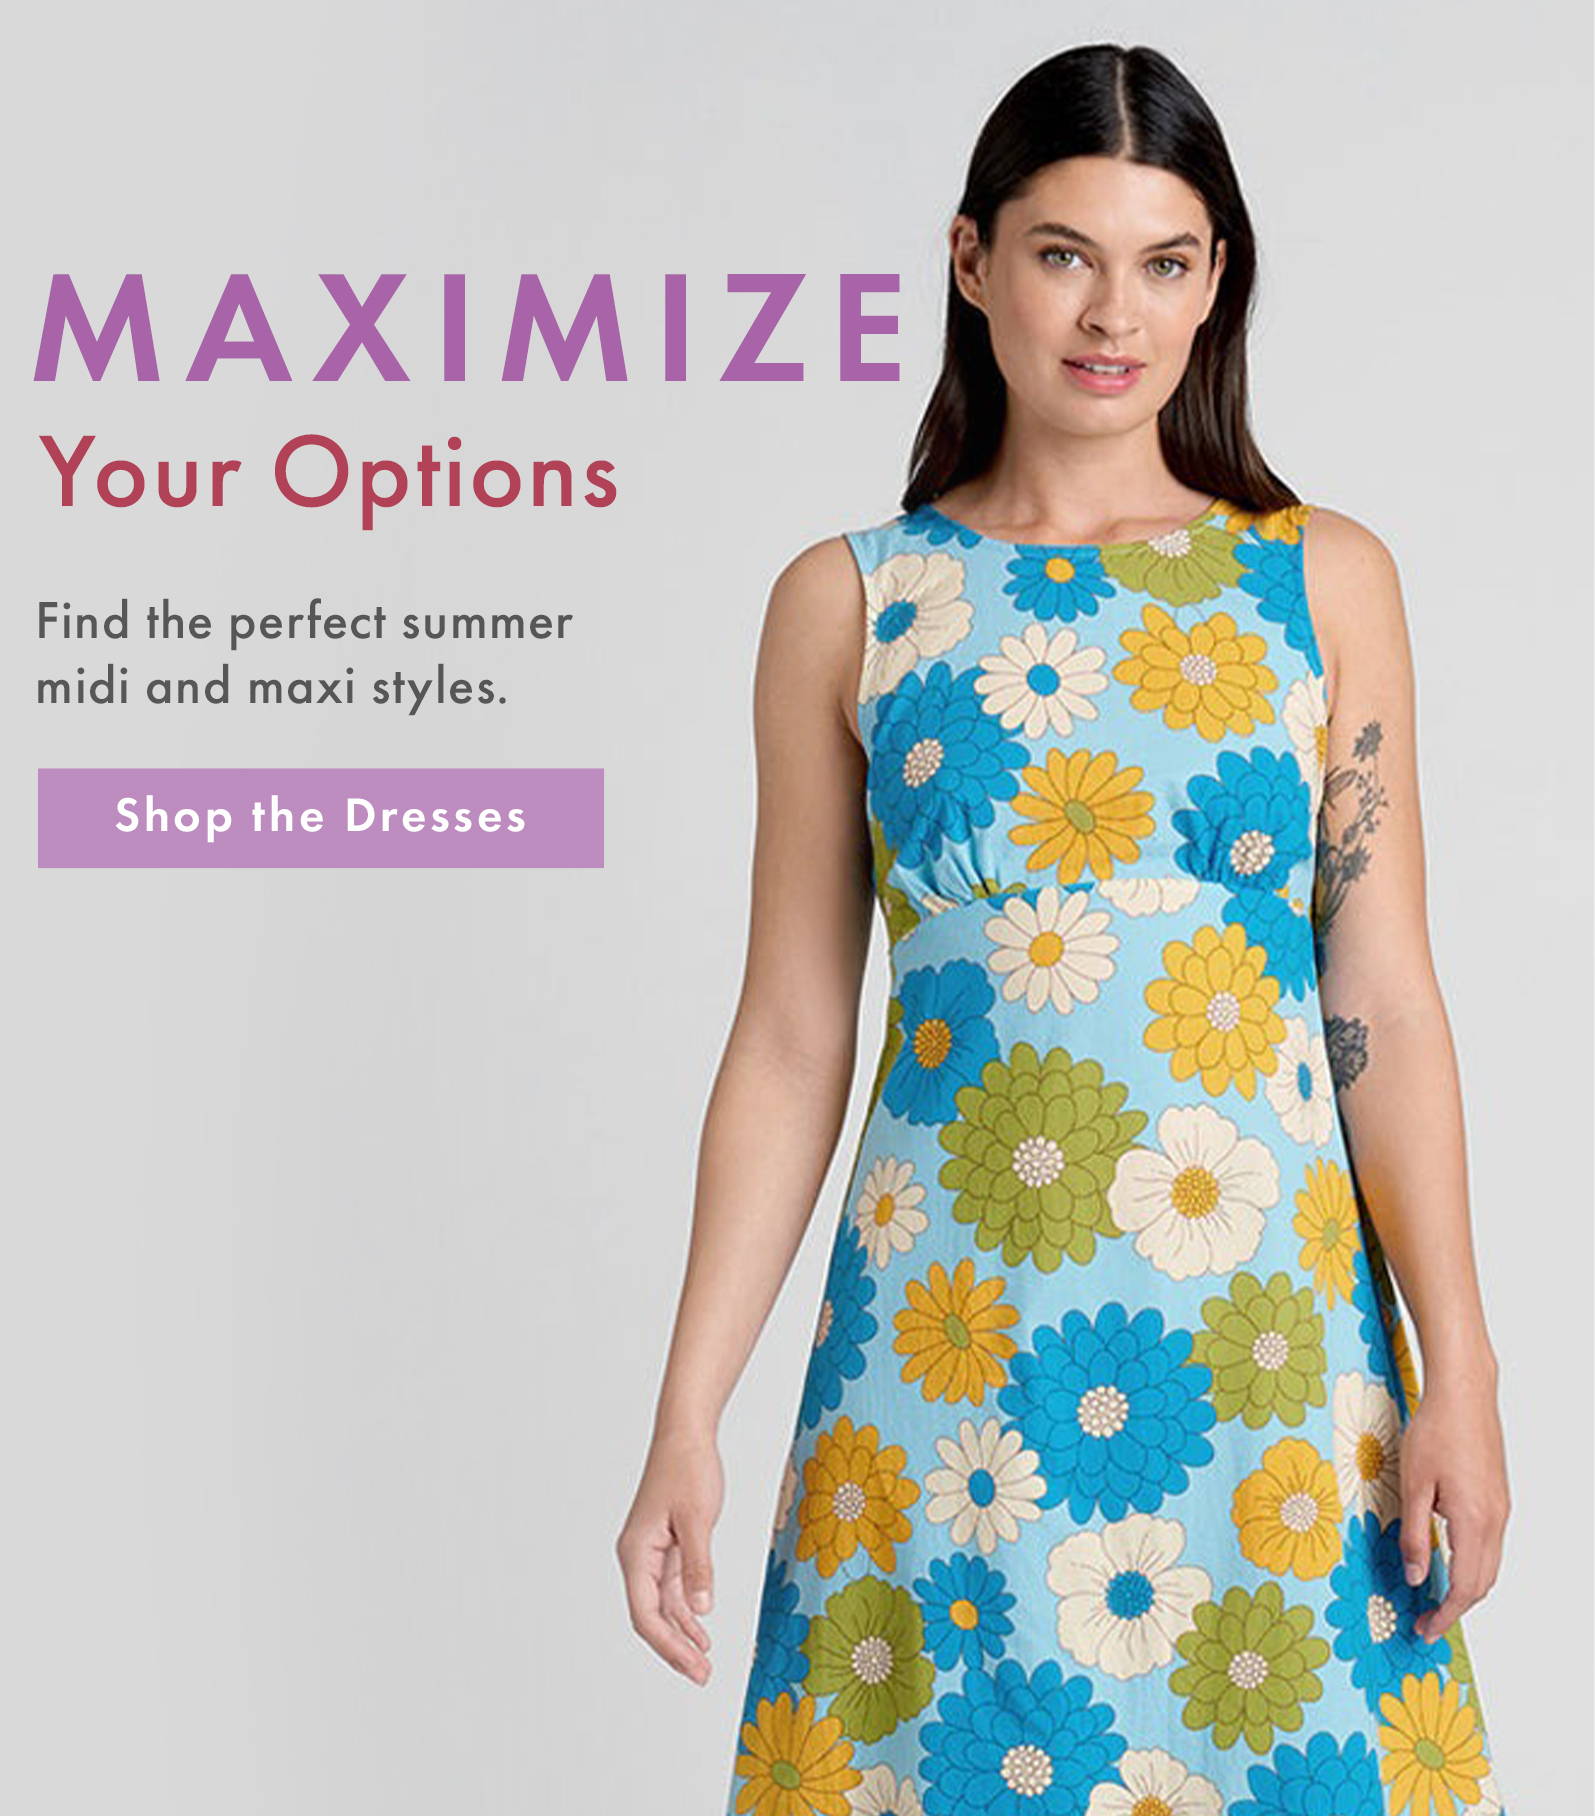 Maximize Your Options - Find the perfect summer midi and maxi styles. SHOP THE DRESSES